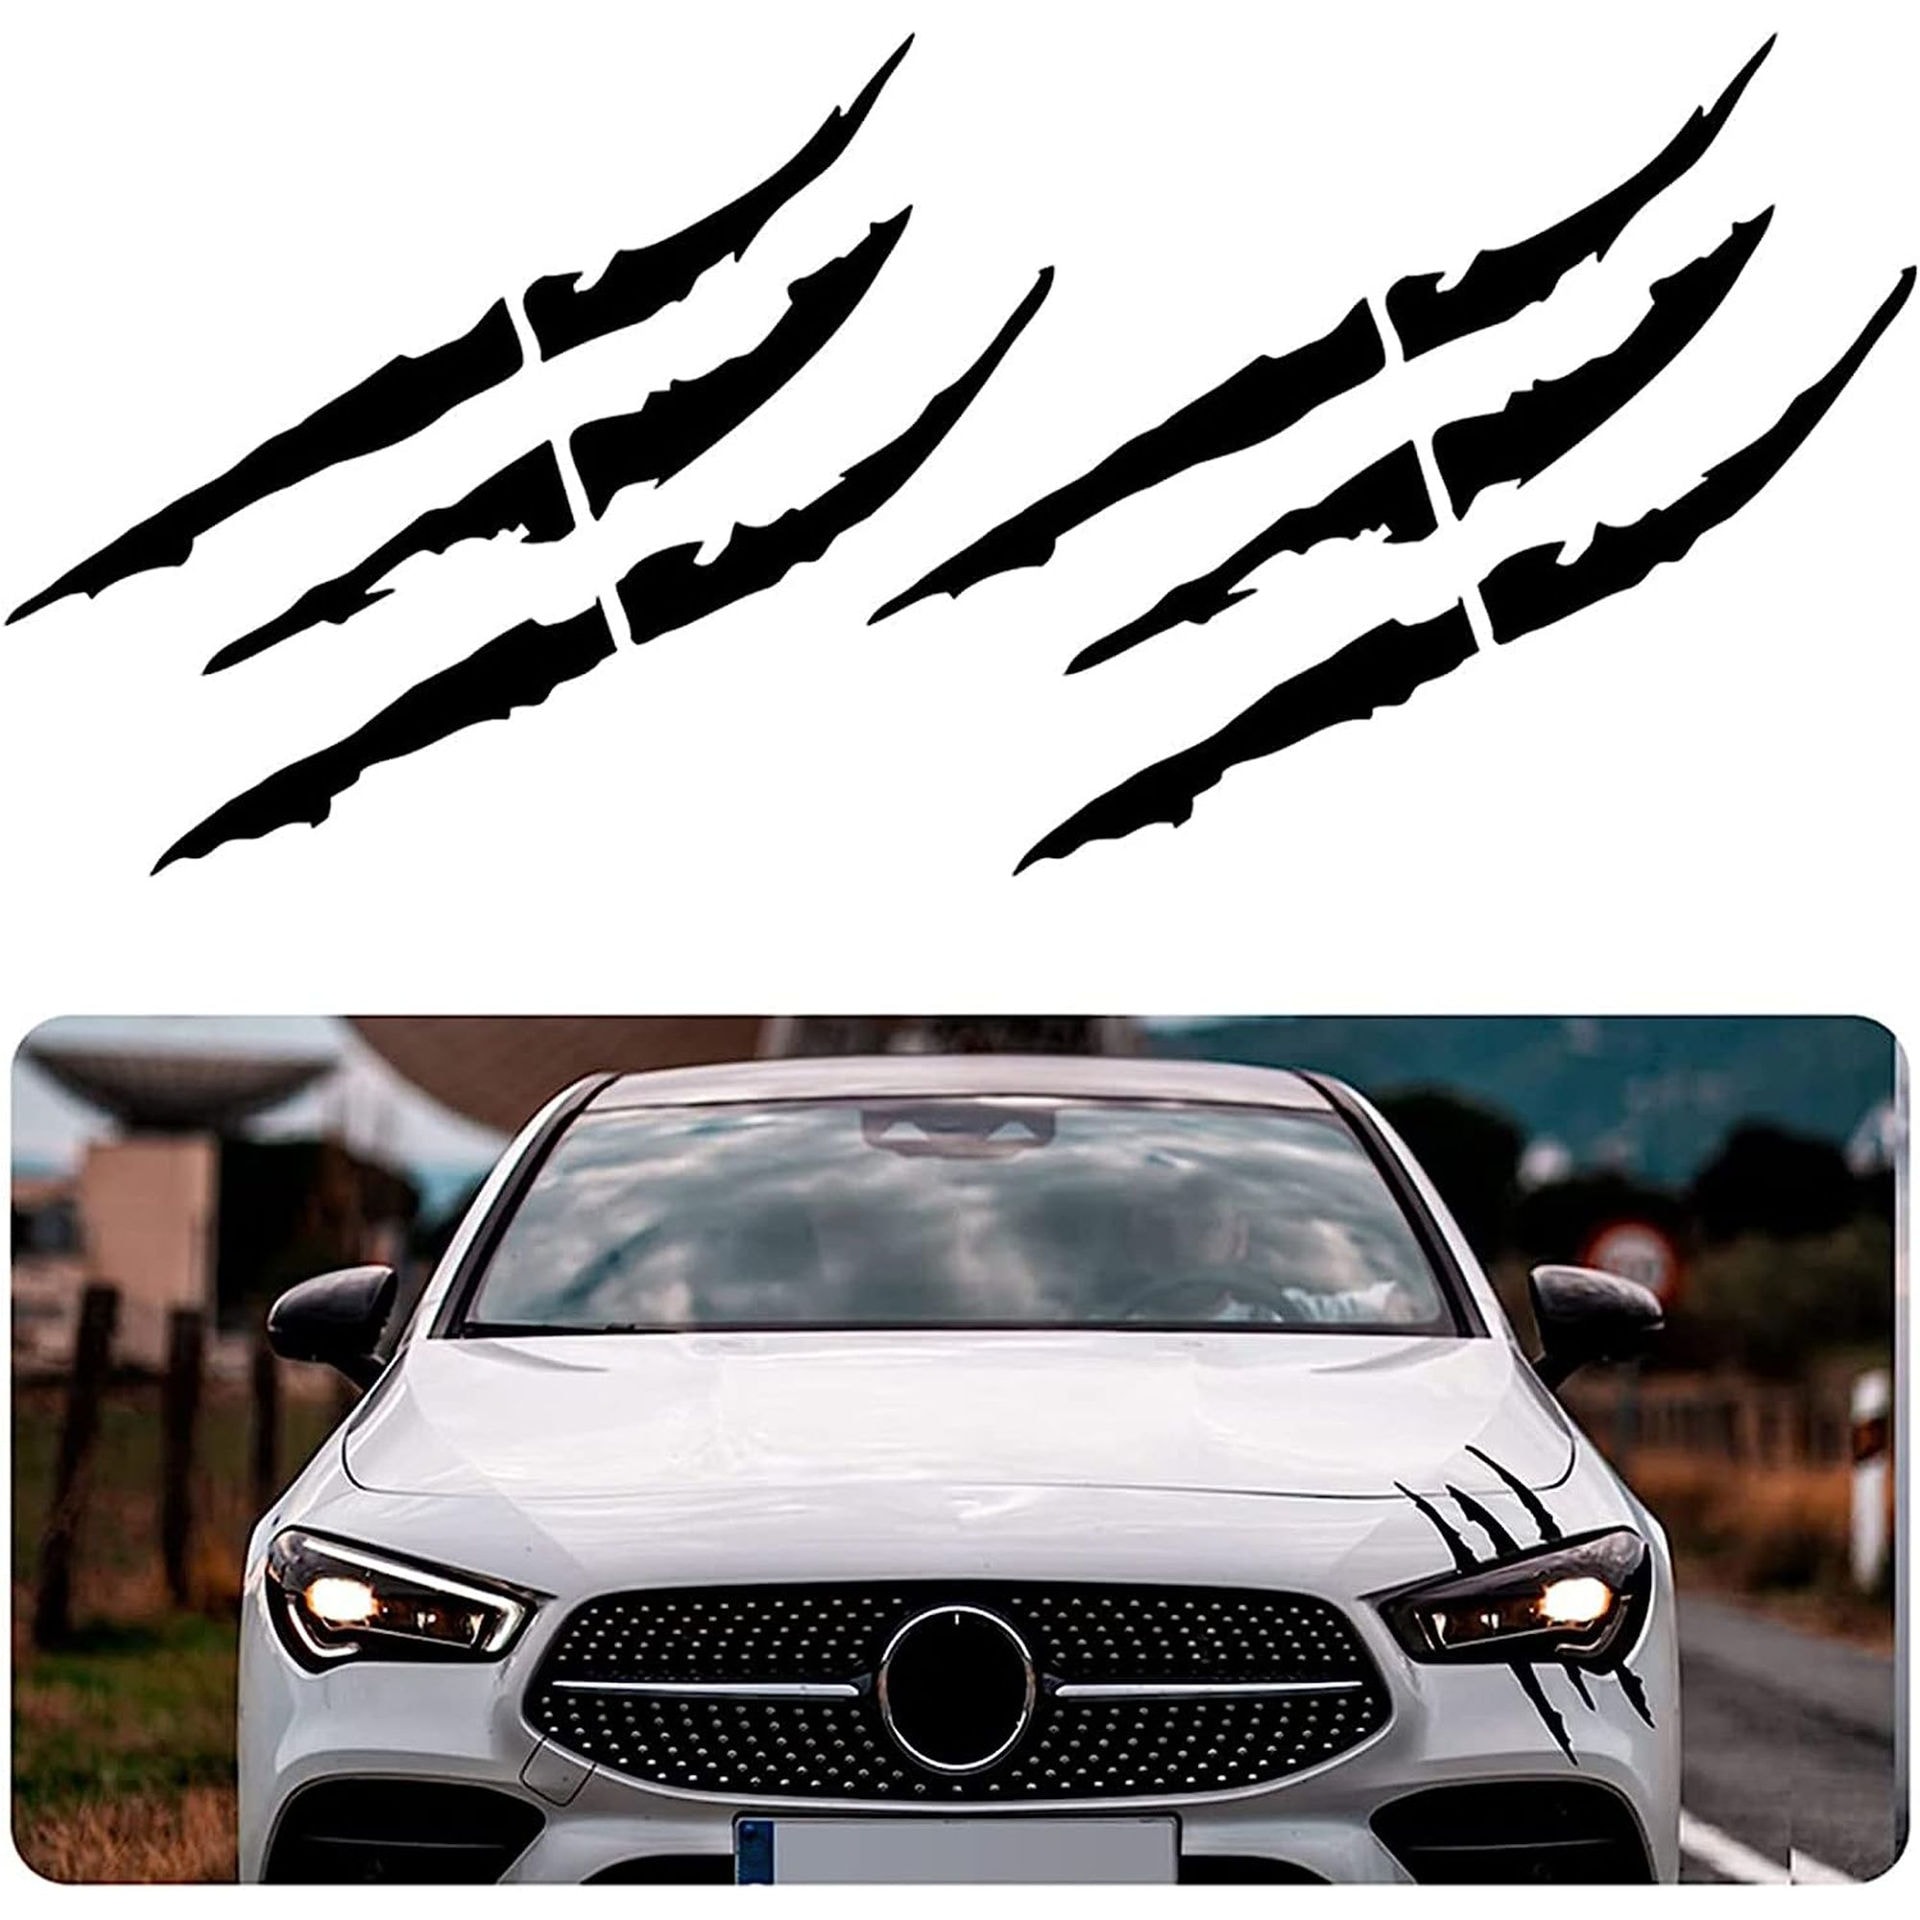 https://assets.dragonmart.ae//pictures/0726364_terrifi-non-reflective-claw-marks-car-decal-stickers-set-of-2pcs-black.jpeg